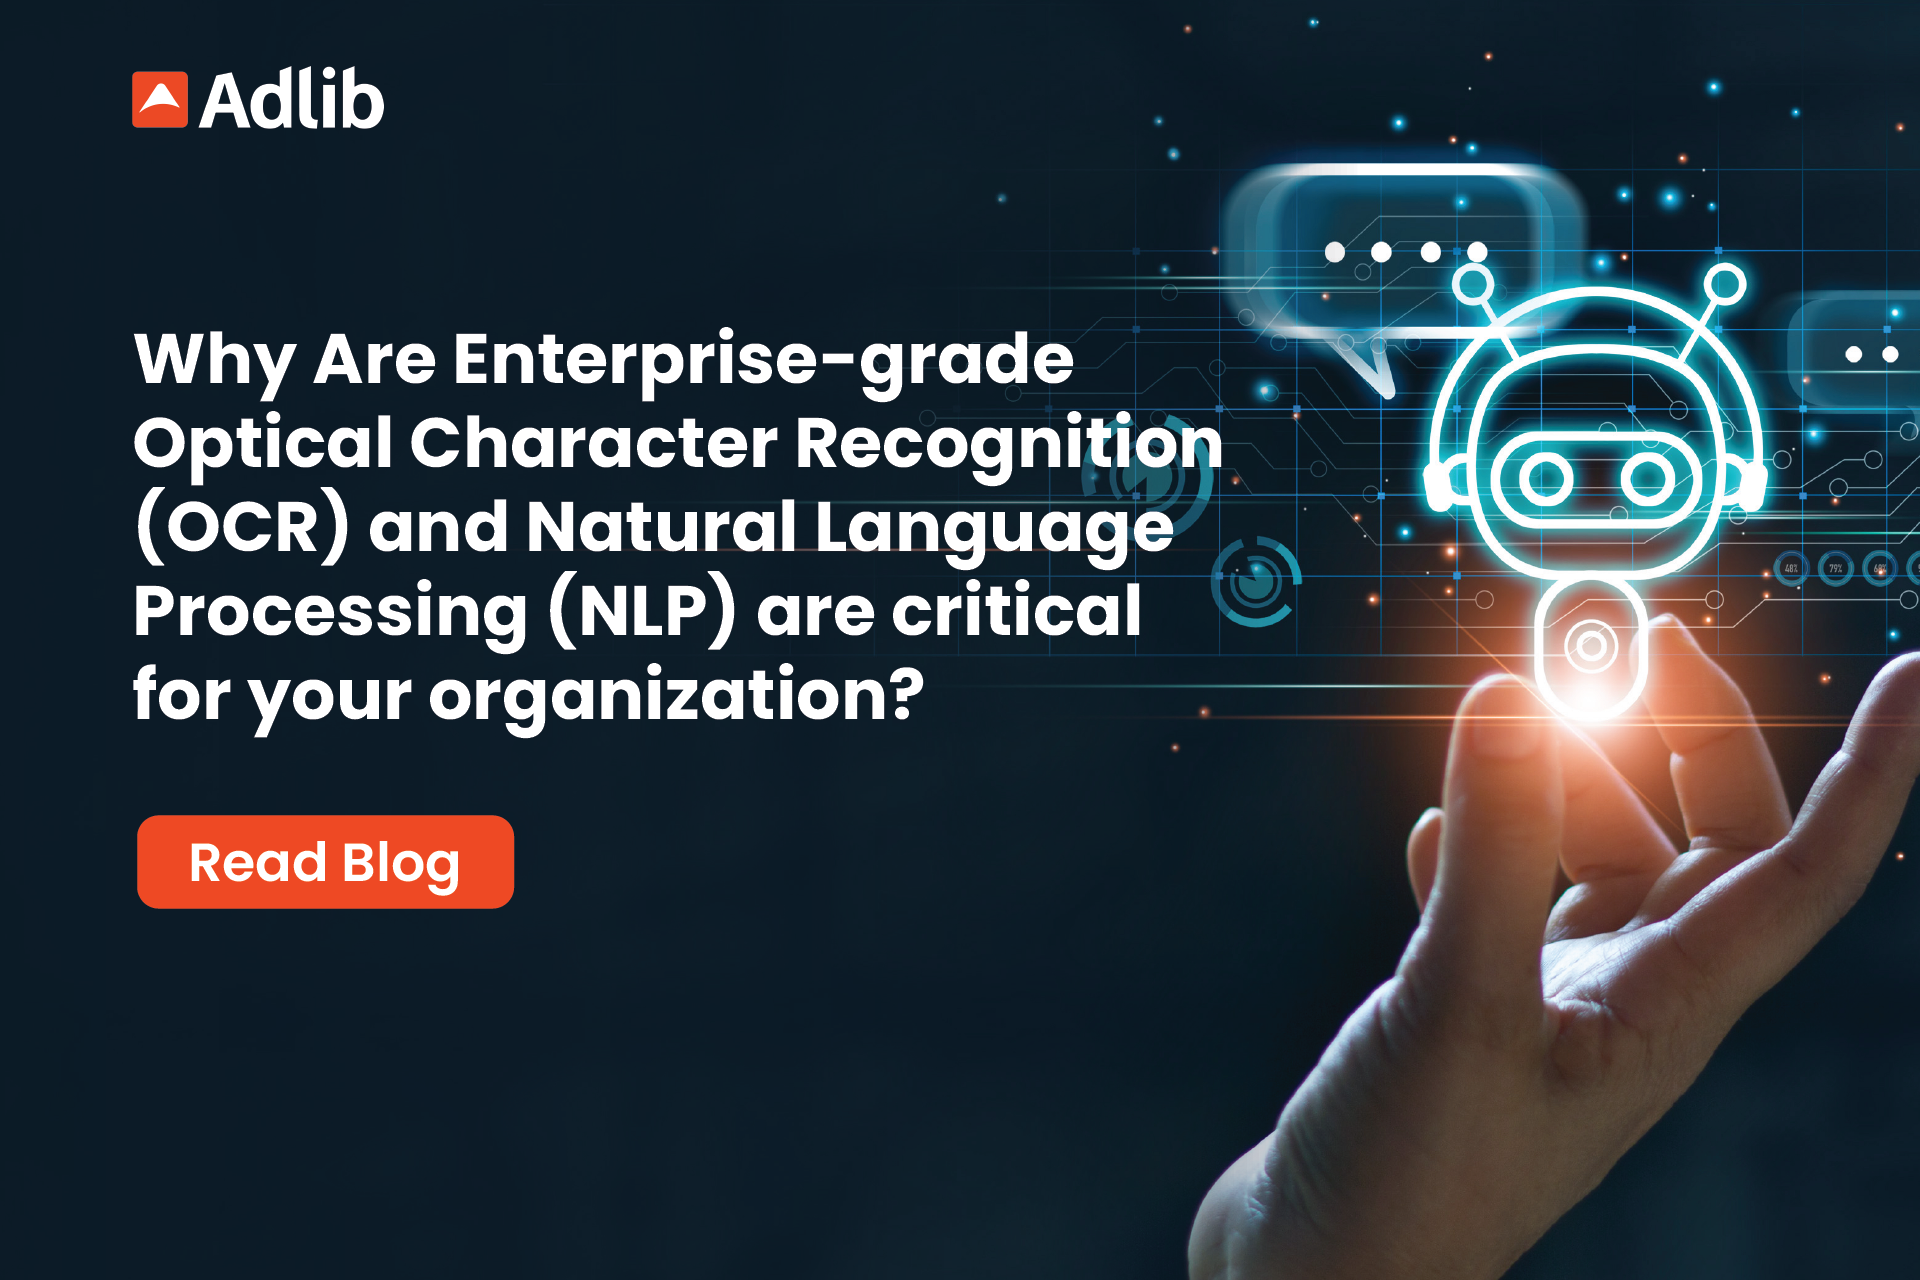 Here is why Enterprise-grade Optical Character Recognition (OCR) and Natural Language Processing (NLP) are critical for your organization Featured Image